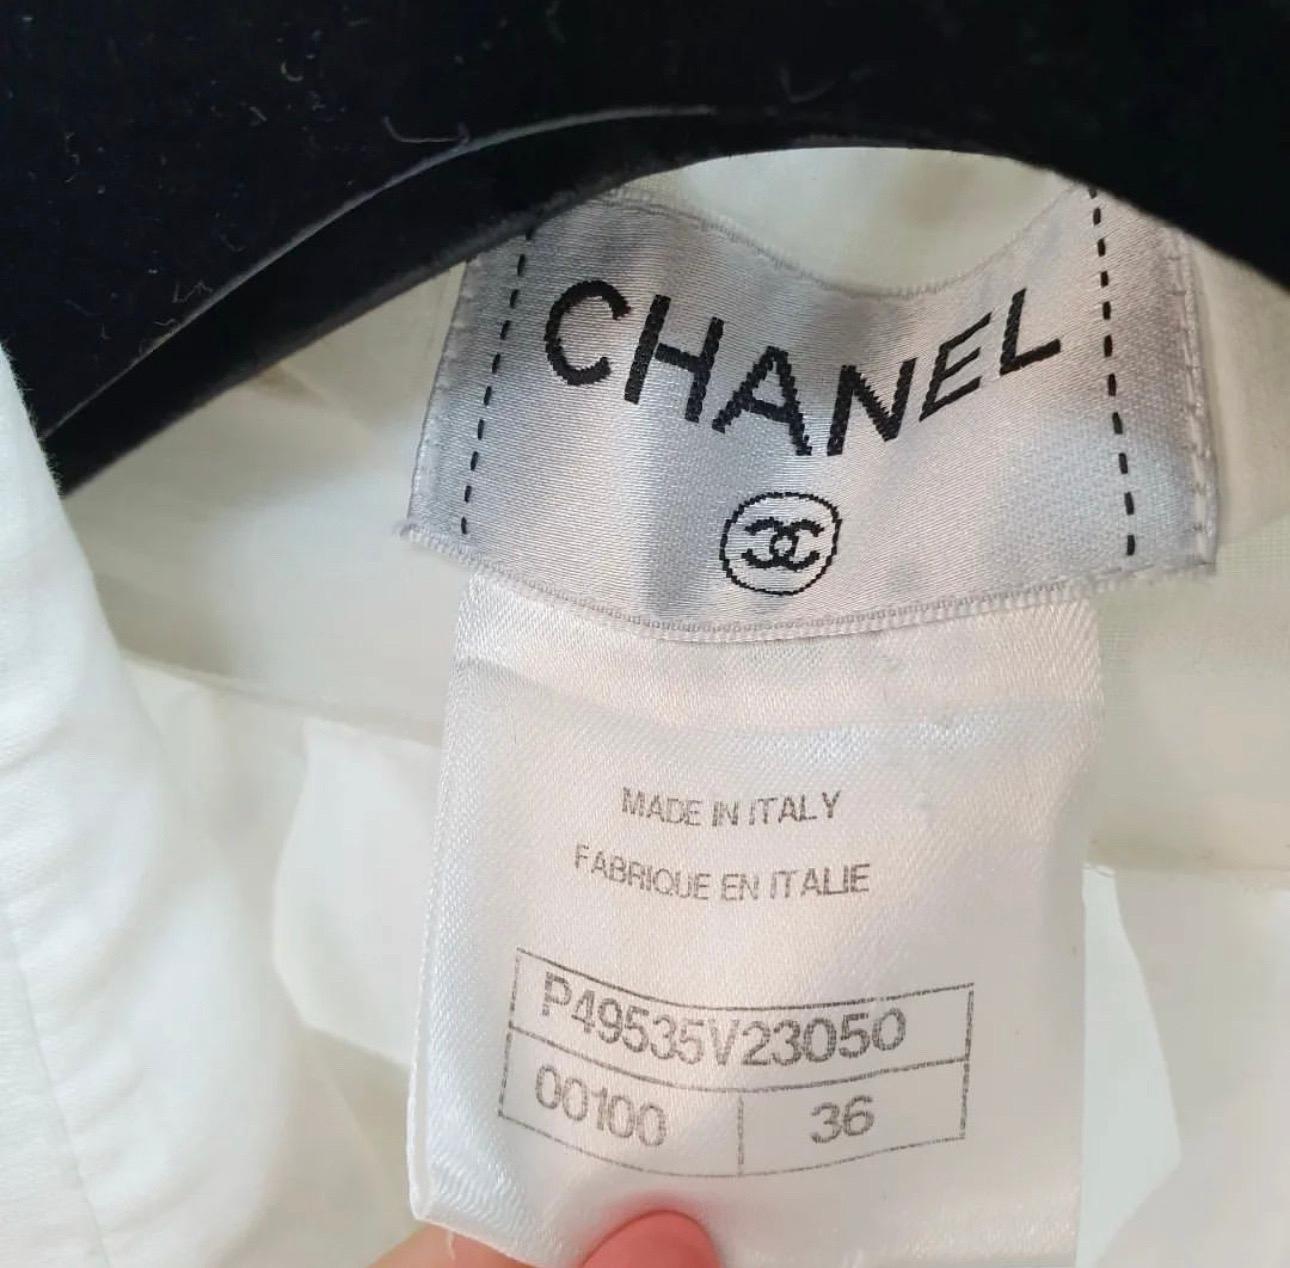 Chanel Dallas White Cotton Blouse Shirt In Excellent Condition For Sale In Krakow, PL